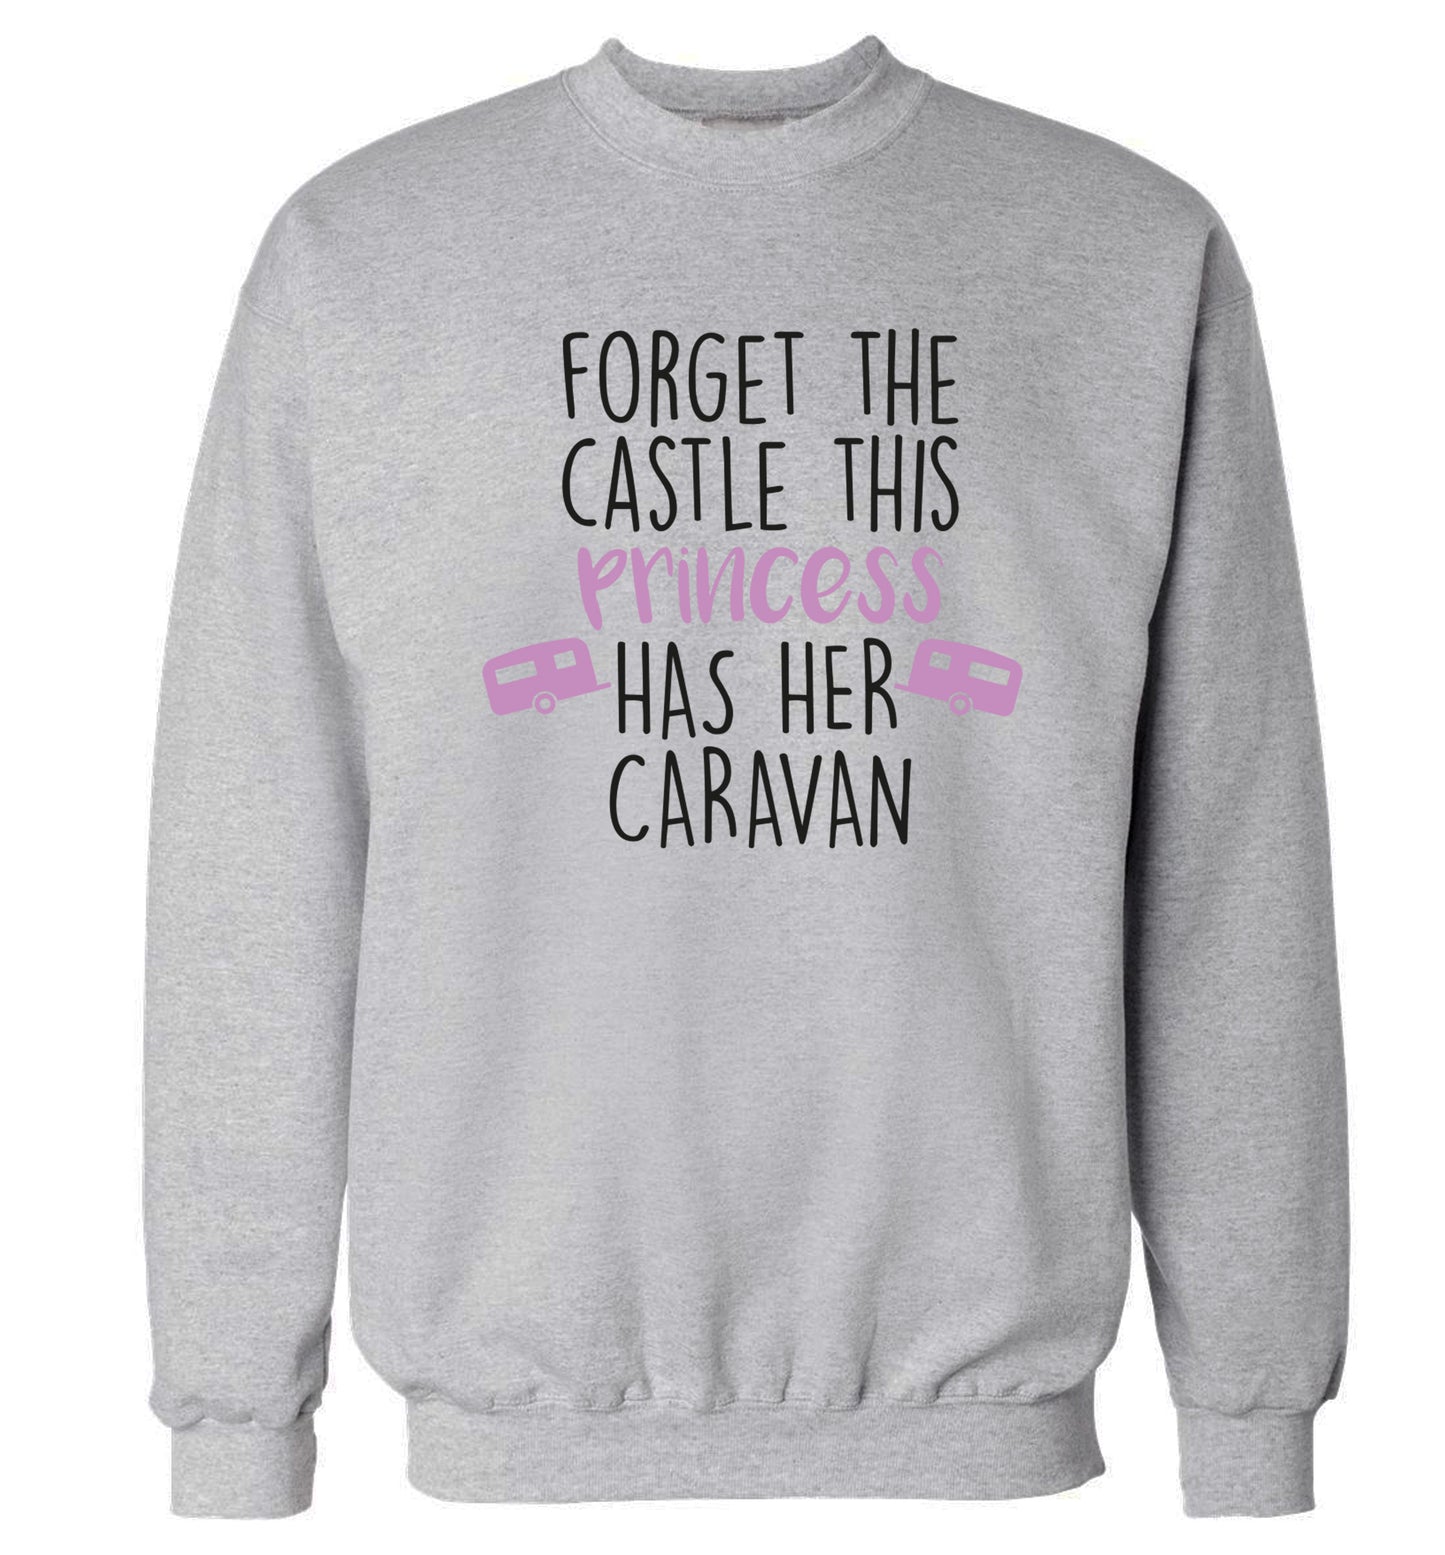 Forget the castle this princess lives at the caravan Adult's unisex grey Sweater 2XL